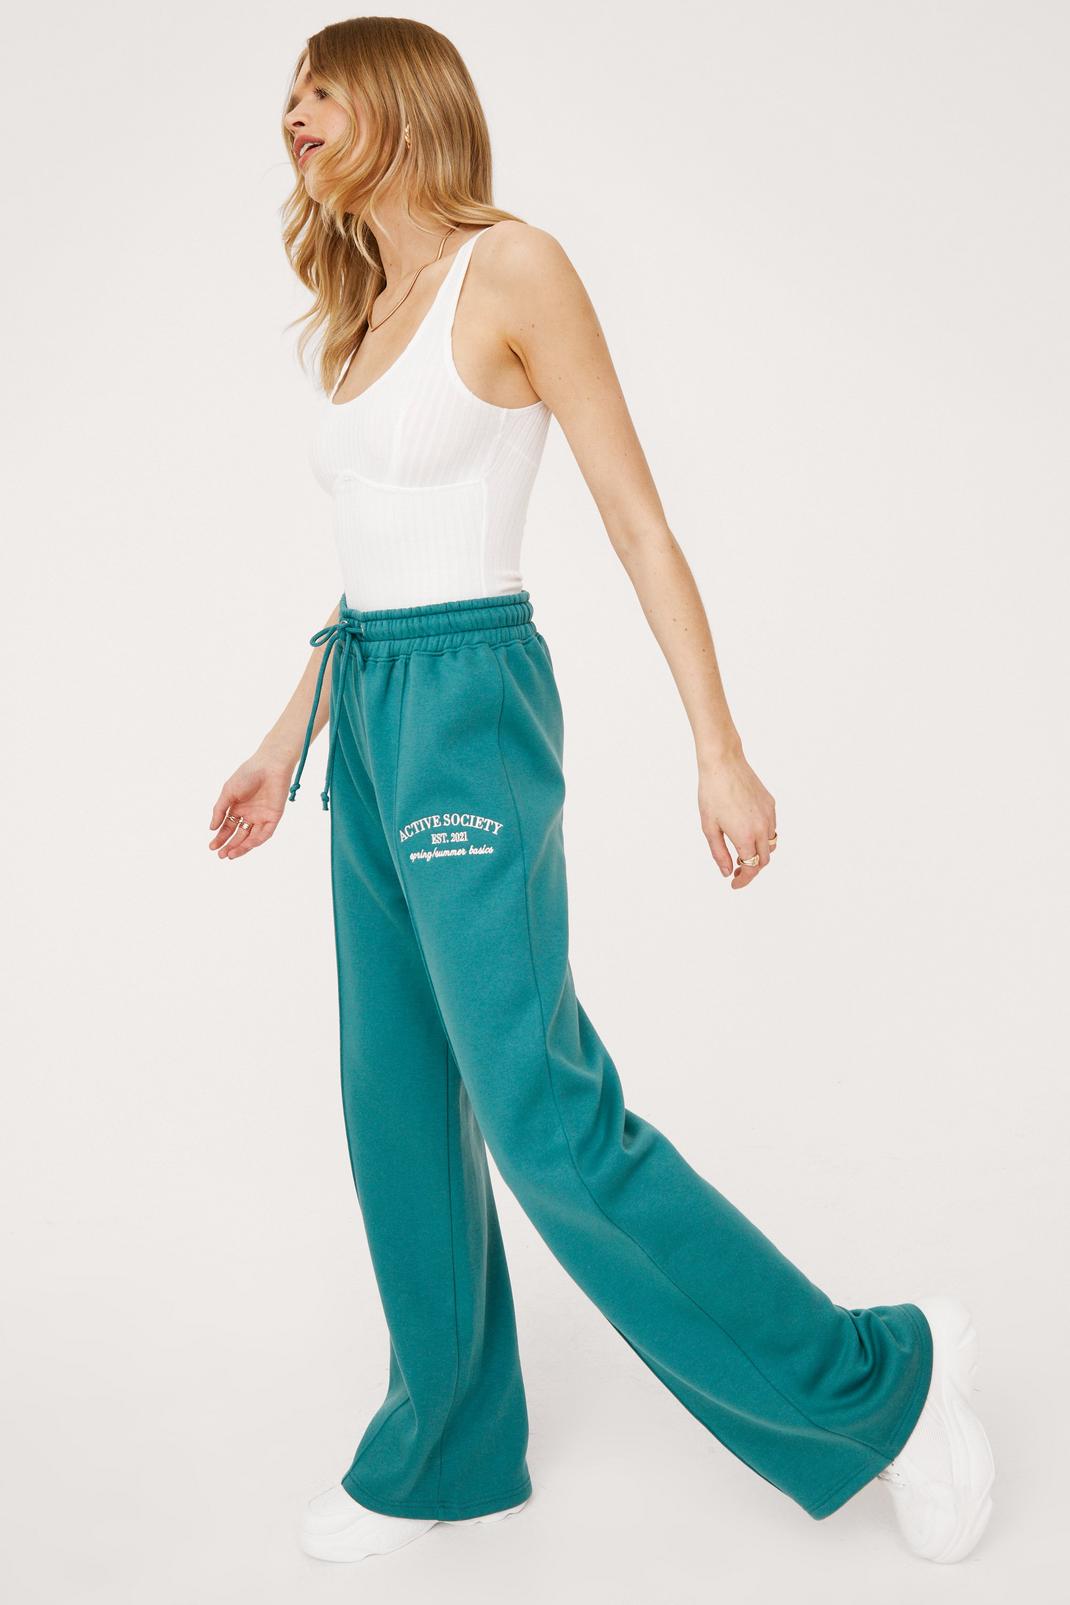 Teal Active Society Graphic Wide Leg Sweatpants image number 1